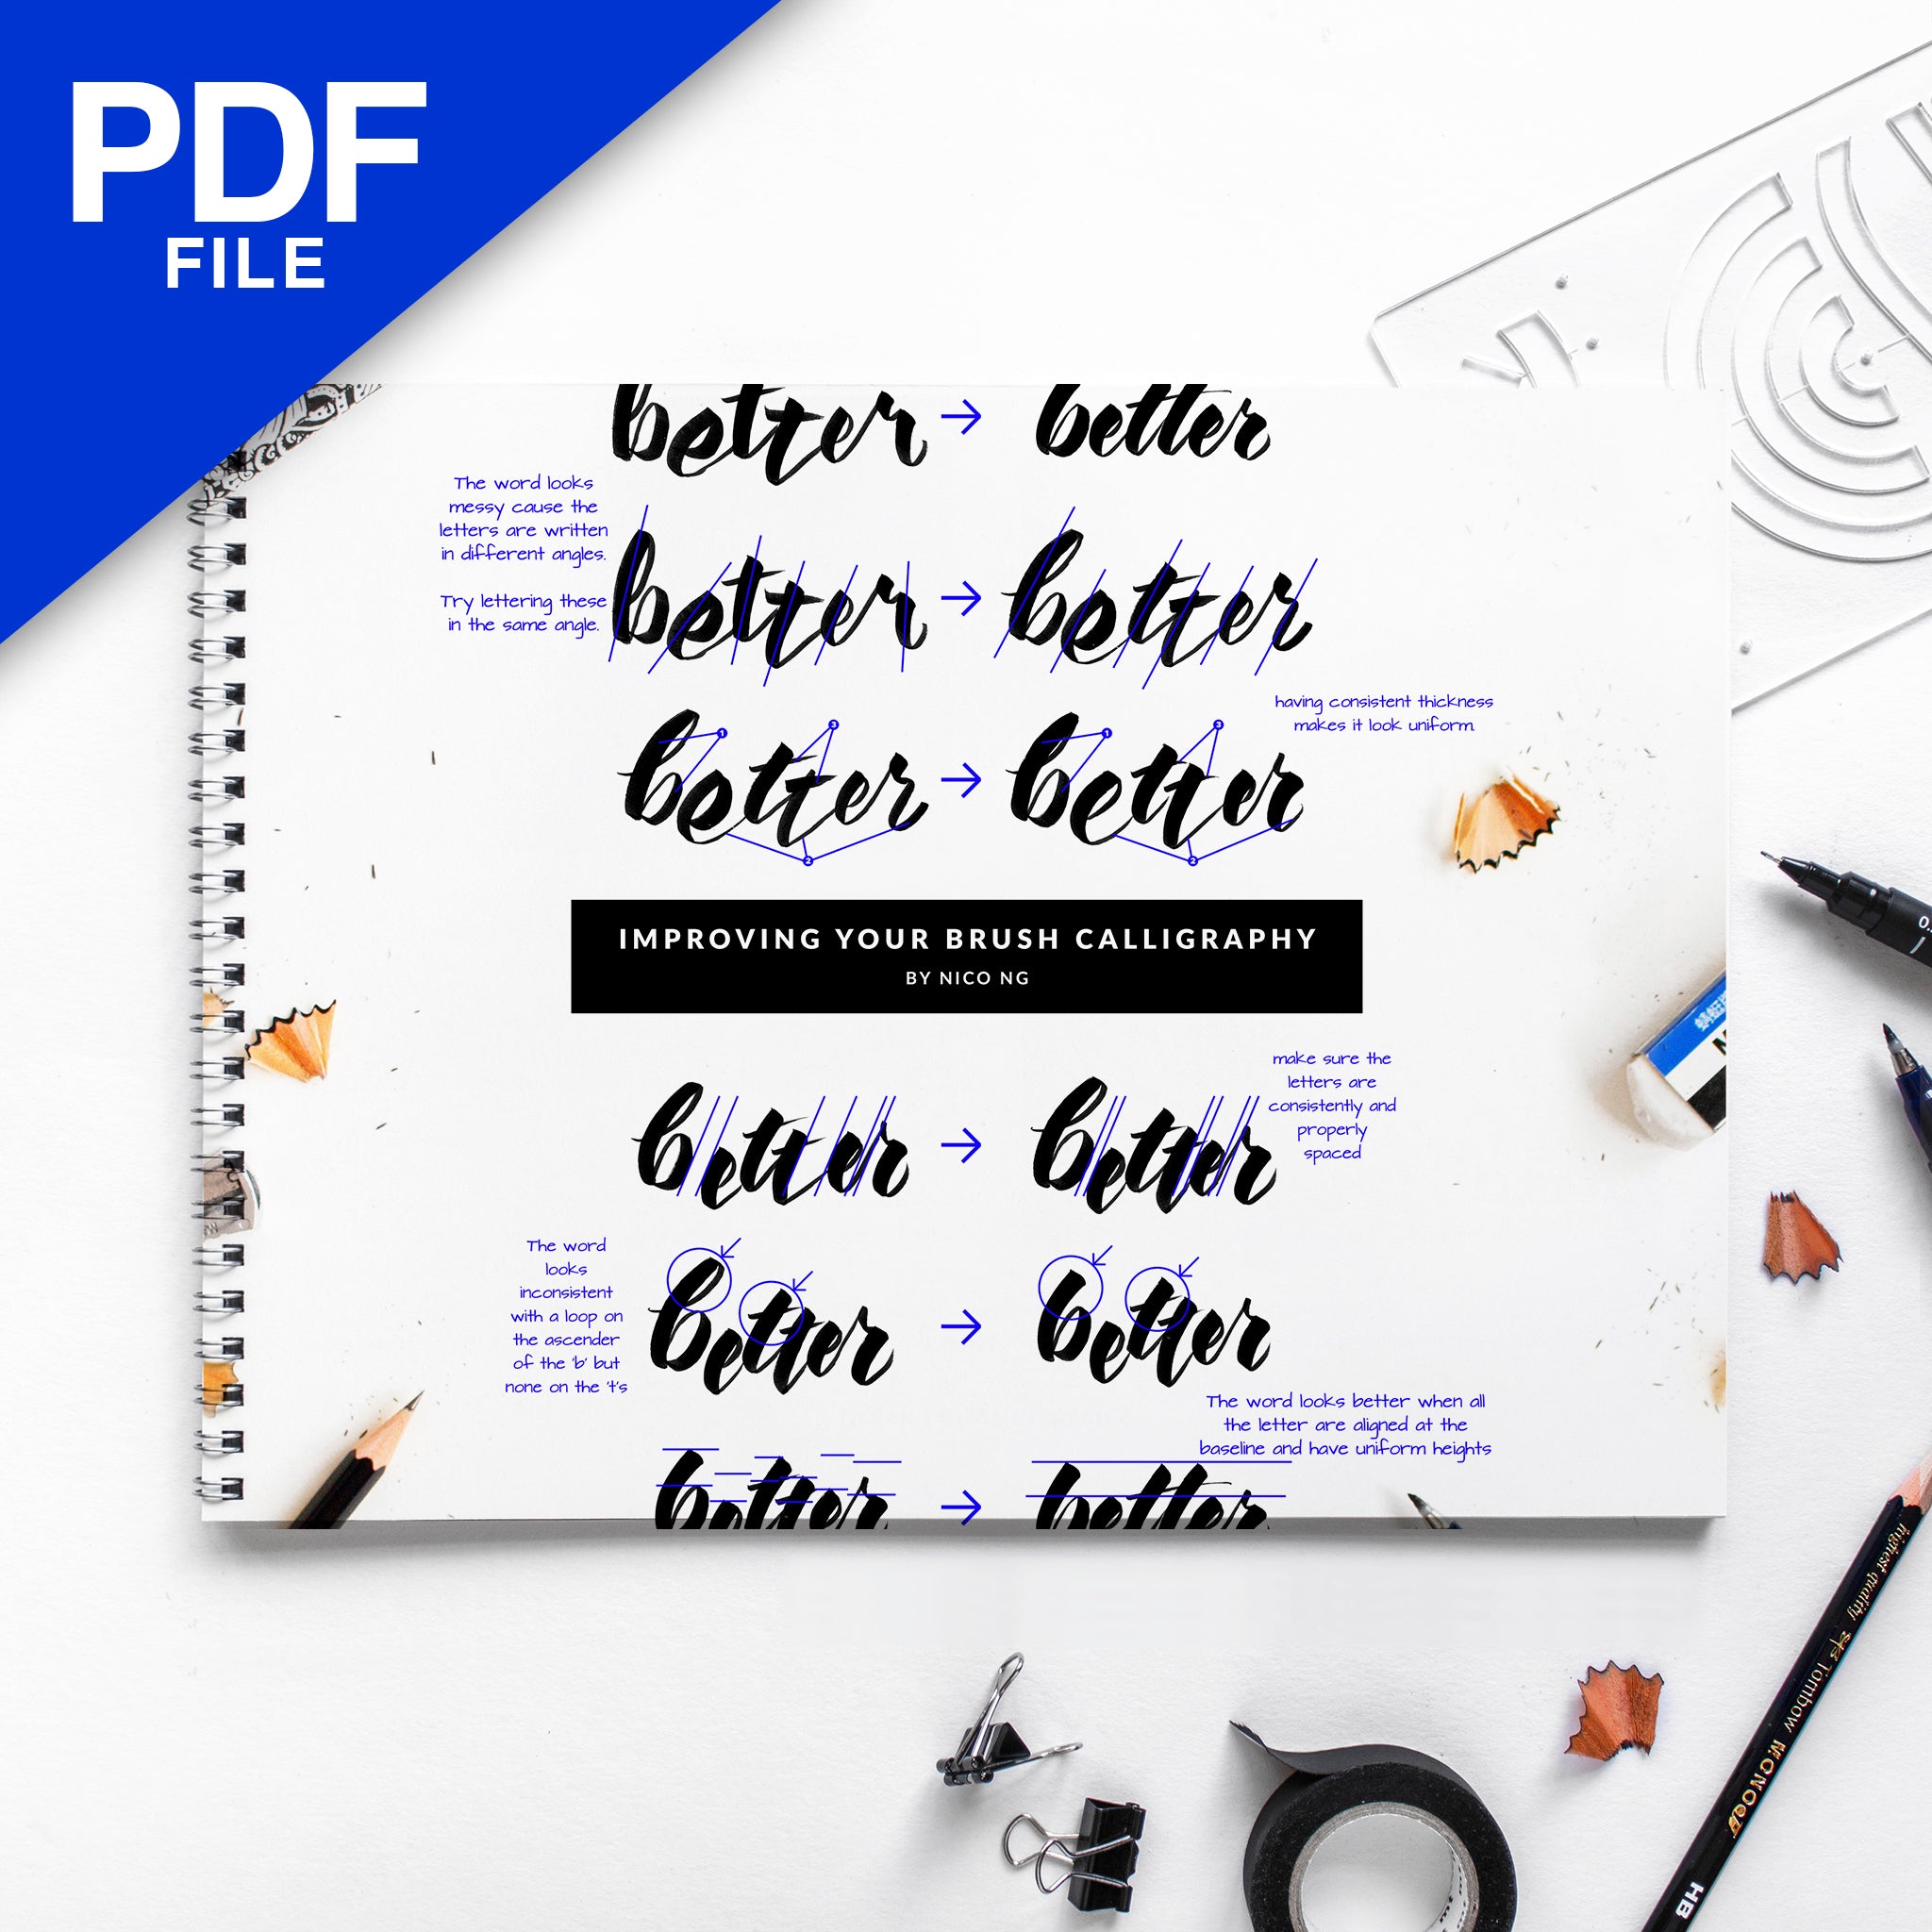 [PDF] Improving Your Brush Calligraphy Workbook by Nico Ng